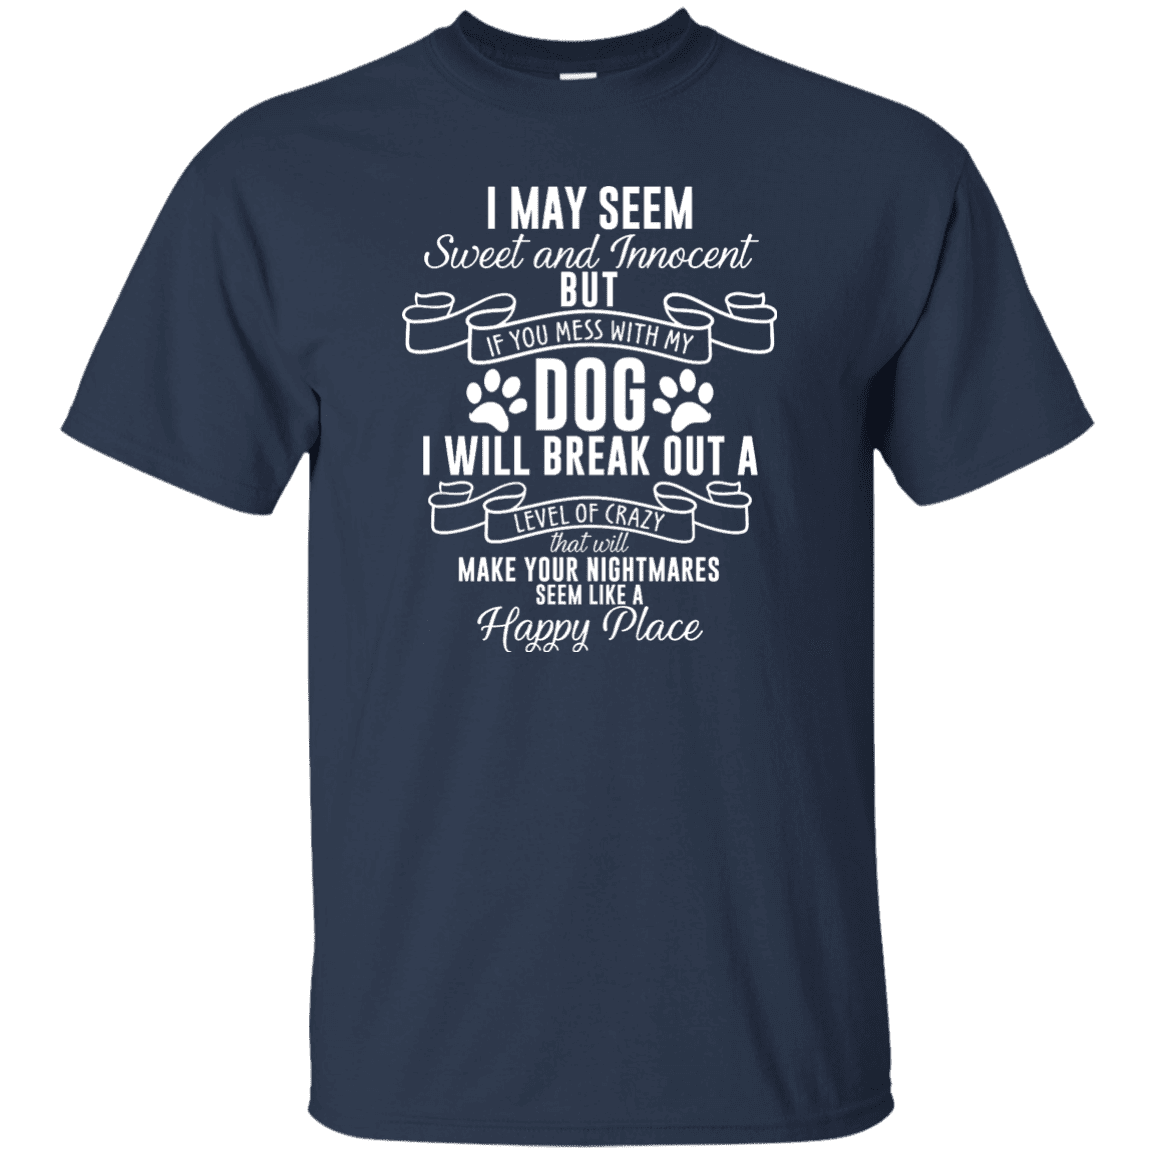 I May Seem Sweet And Innocent - T Shirt – Rescuers Club